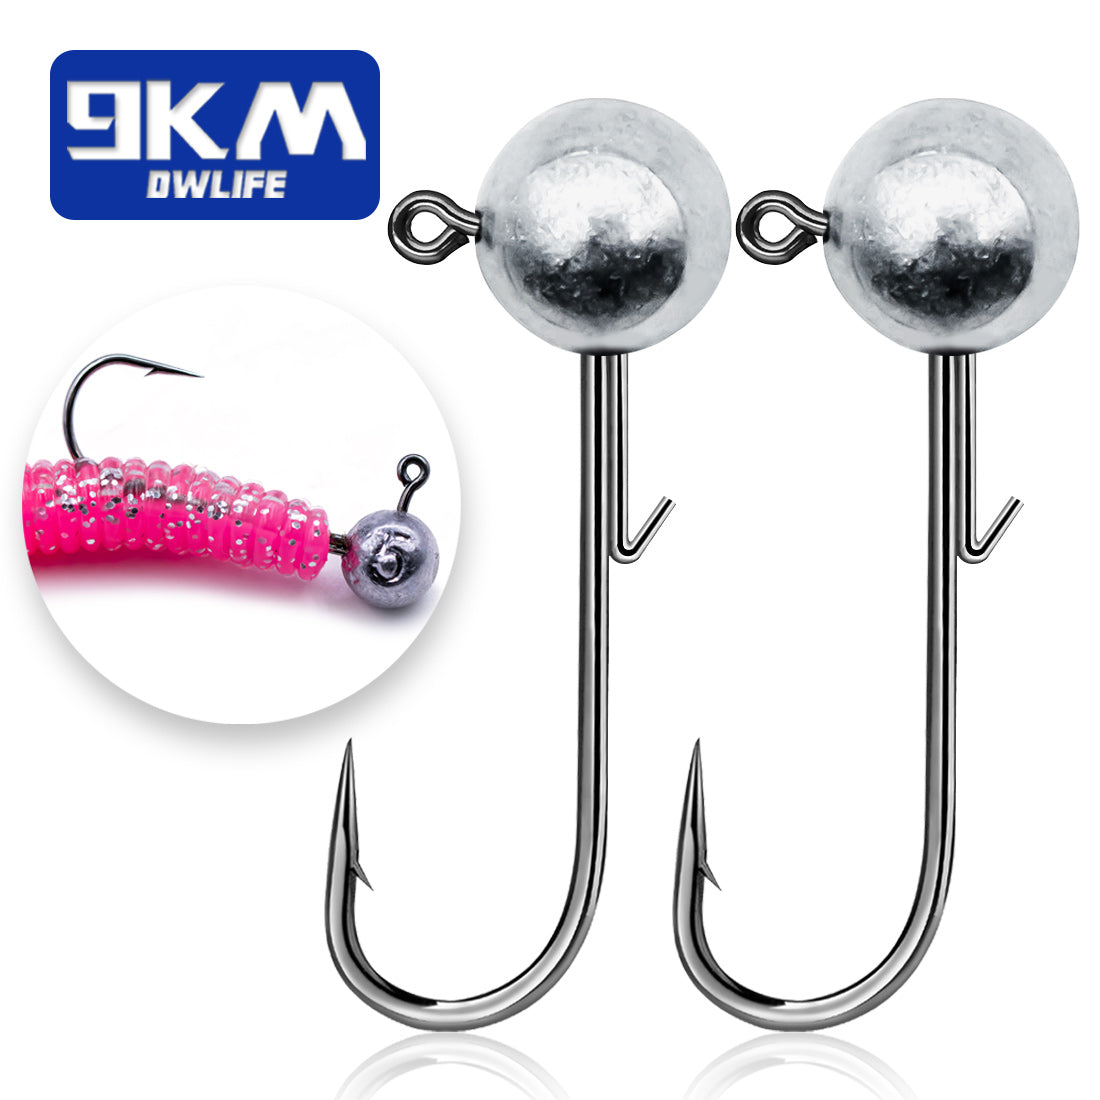 Ned Rig Jig Hook Kits-15pcs Finesse Mushroom Fishing Jig Heads Hook for  Bass Fishing,Pike,Soft Plastic Lure for Saltwater Freshwater 3.5g-15pcs,  Jigs -  Canada